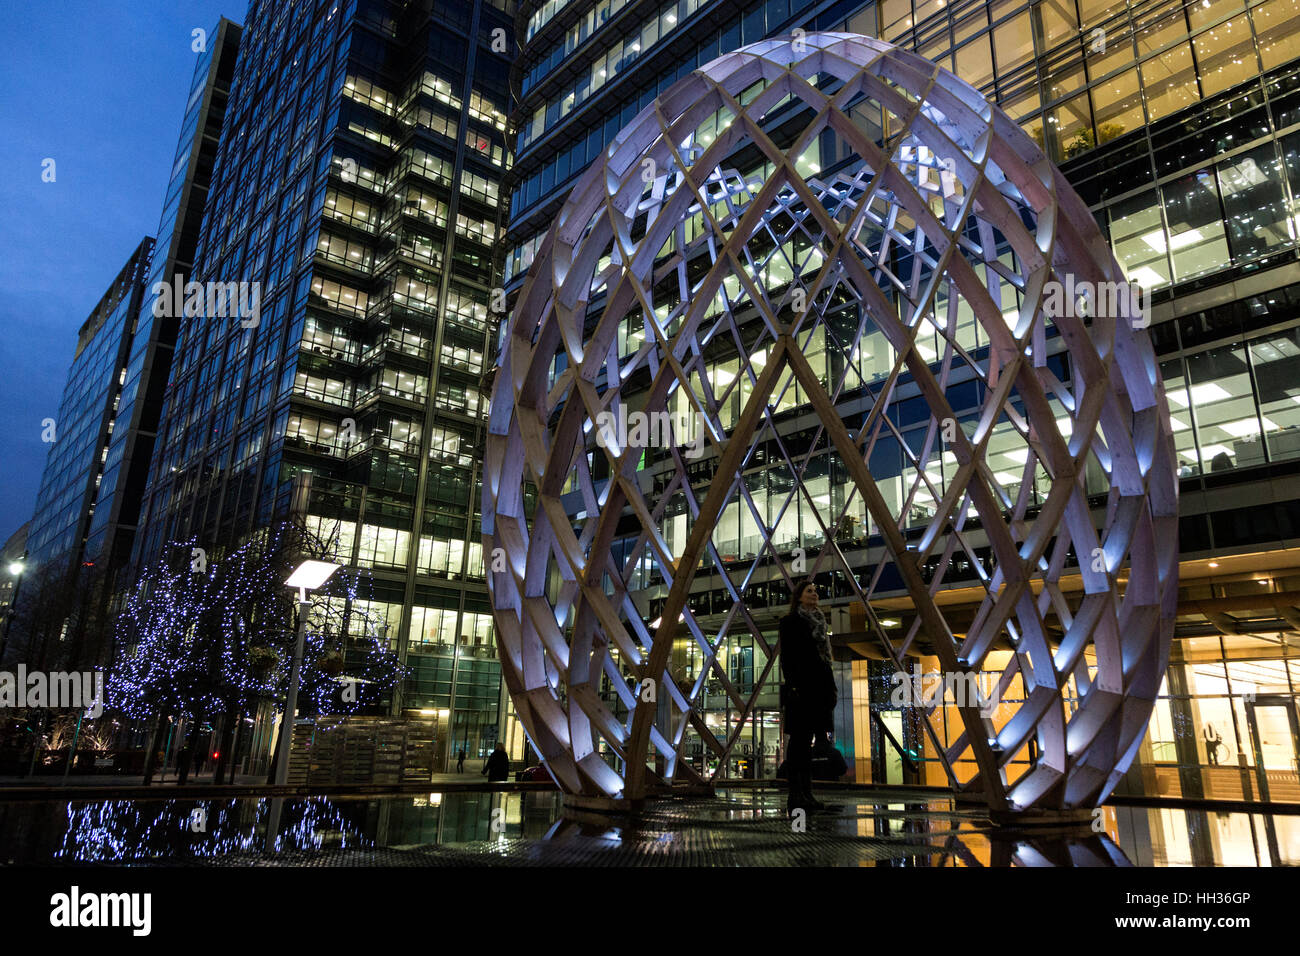 London, UK. 16 January 2017. Ovo by Mustafa Hadi and Pol Marchandise (Odeaubois). The 2017 Canary Wharf Winter Lights Festival opens today, 16 January, and runs until 27 January 2017. © Nick Savage/Alamy Live News Stock Photo